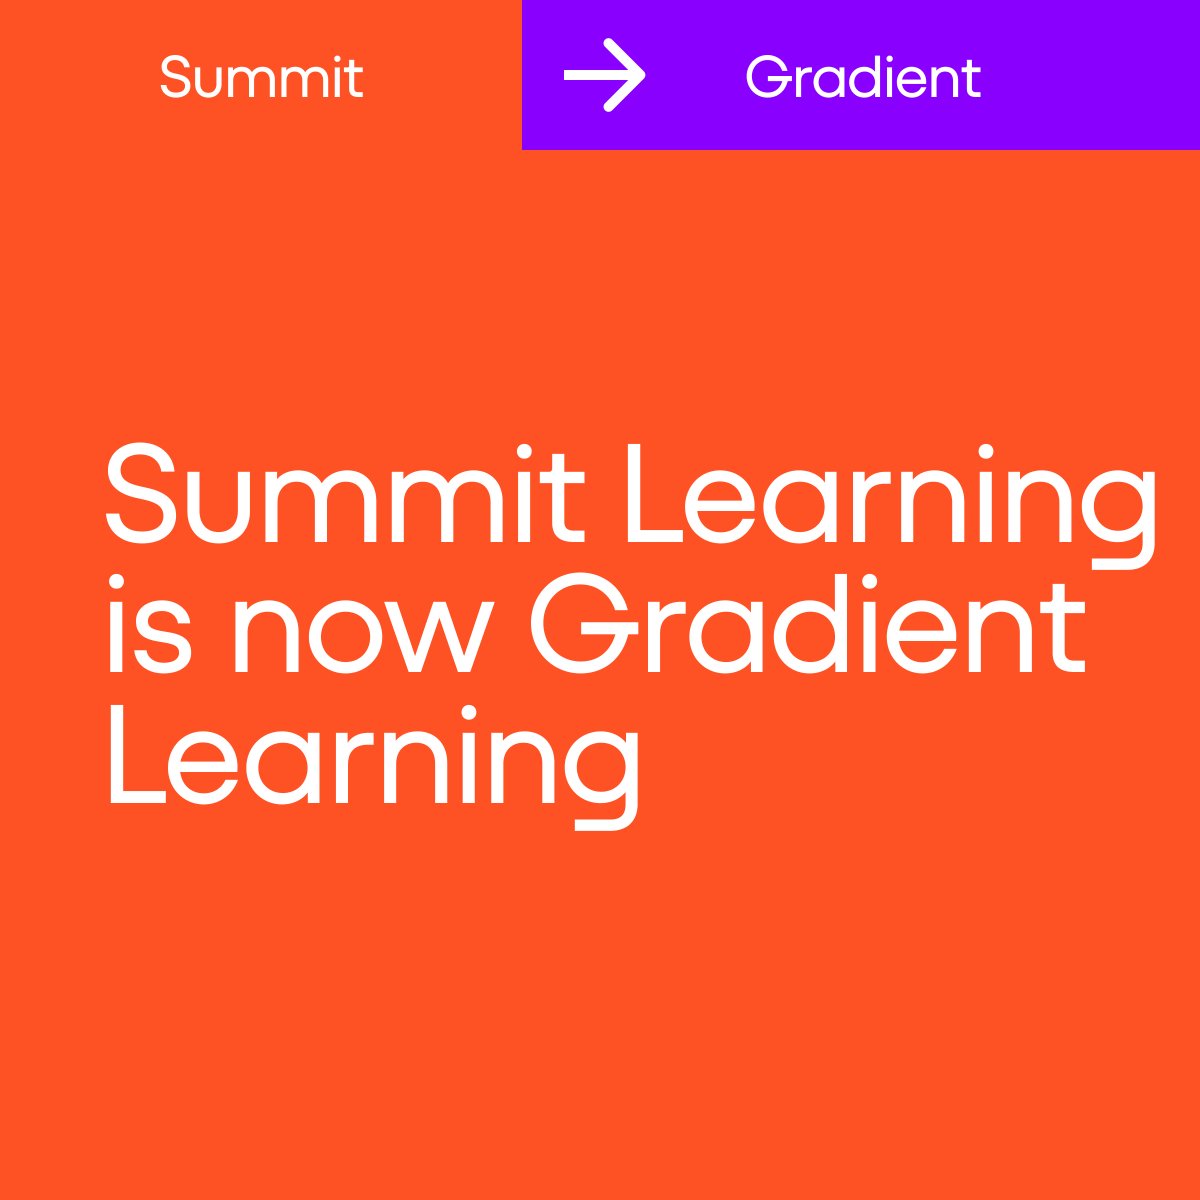 Summit Learning is now Gradient Learning! Learn more about this change that helps us give you a unified system that makes Whole Student Learning achievable: bit.ly/3wKPrKo